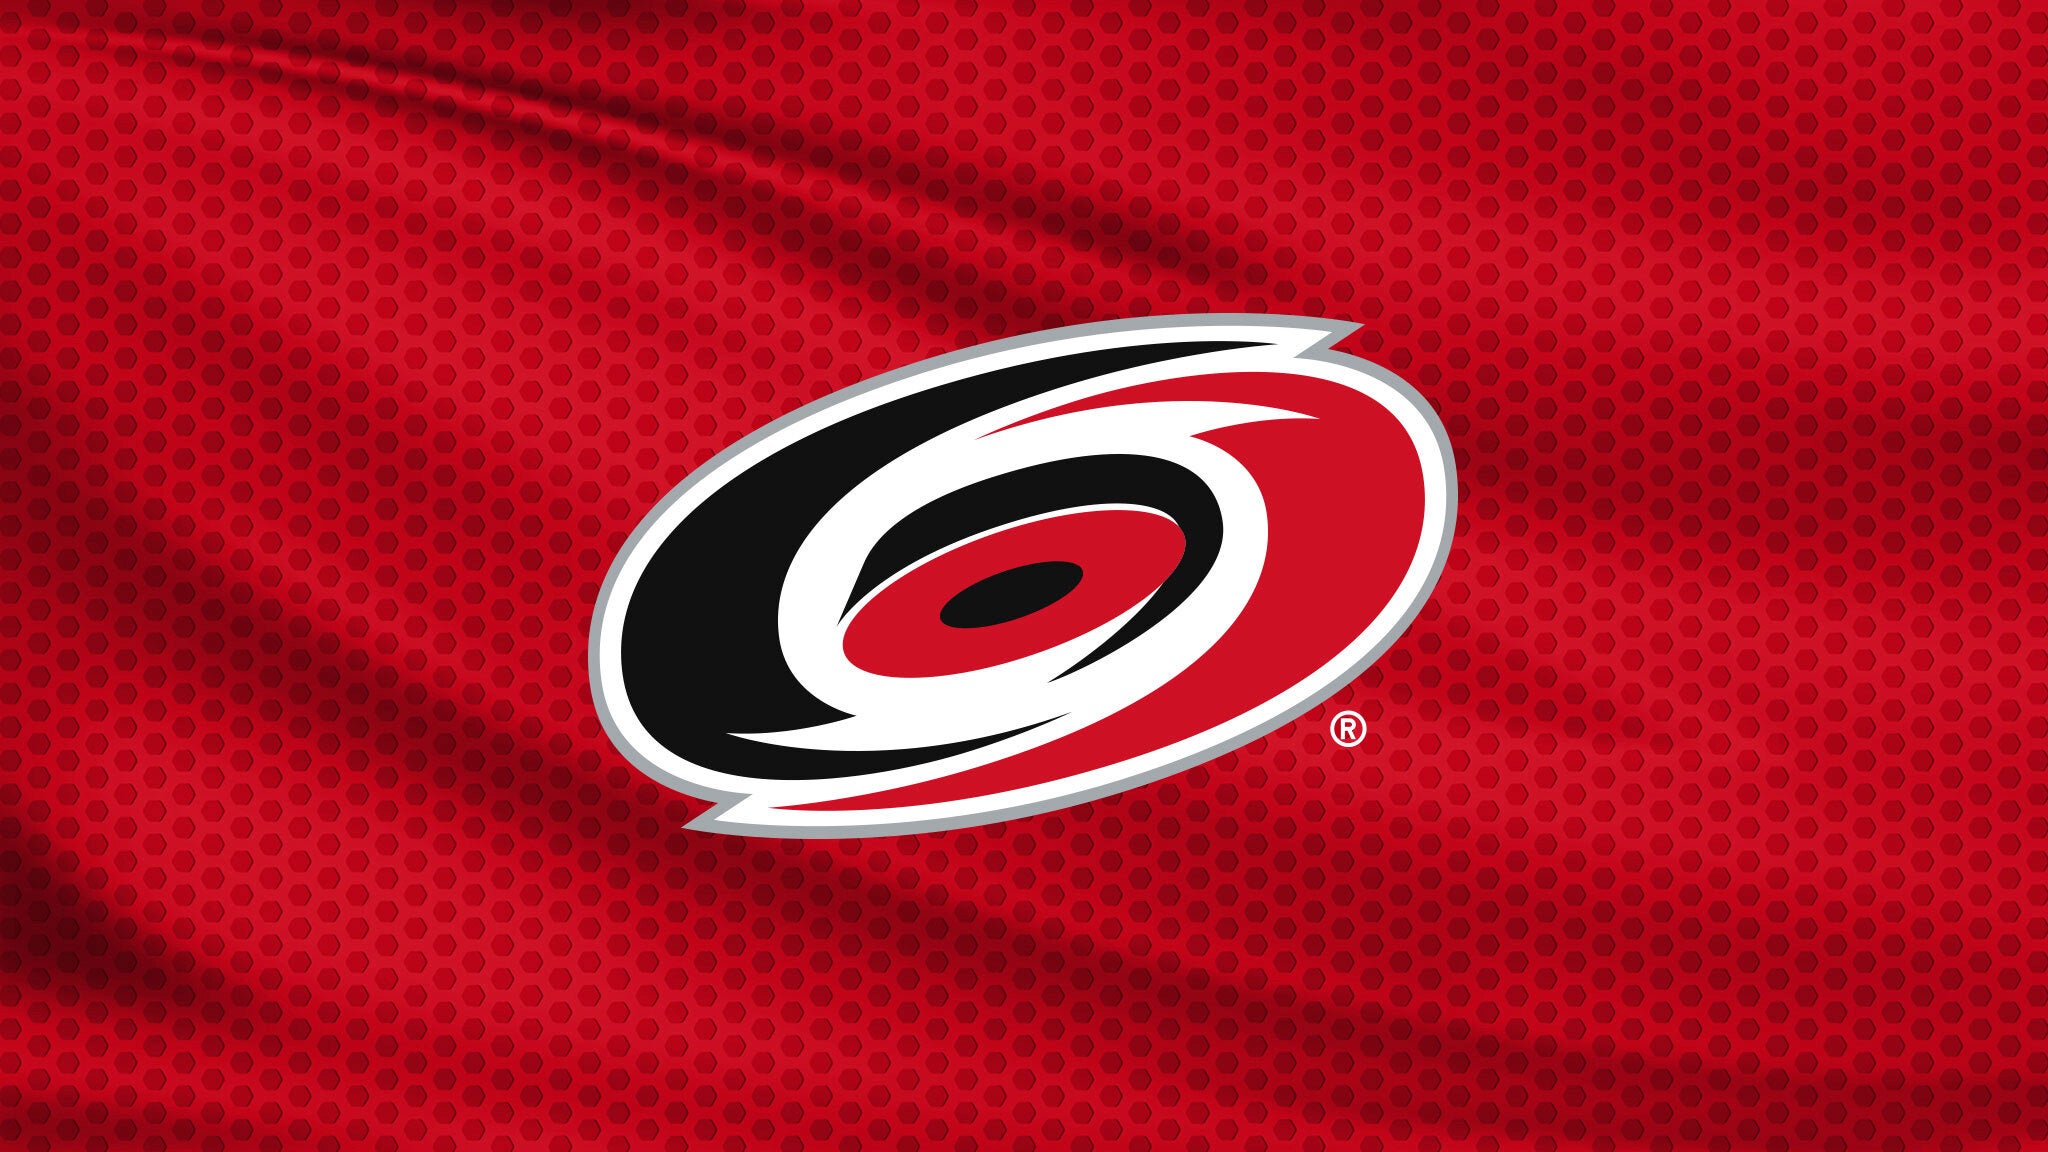 Carolina Hurricanes vs. Toronto Maple Leafs in Raleigh promo photo for Standing Room Only Ticket presale offer code